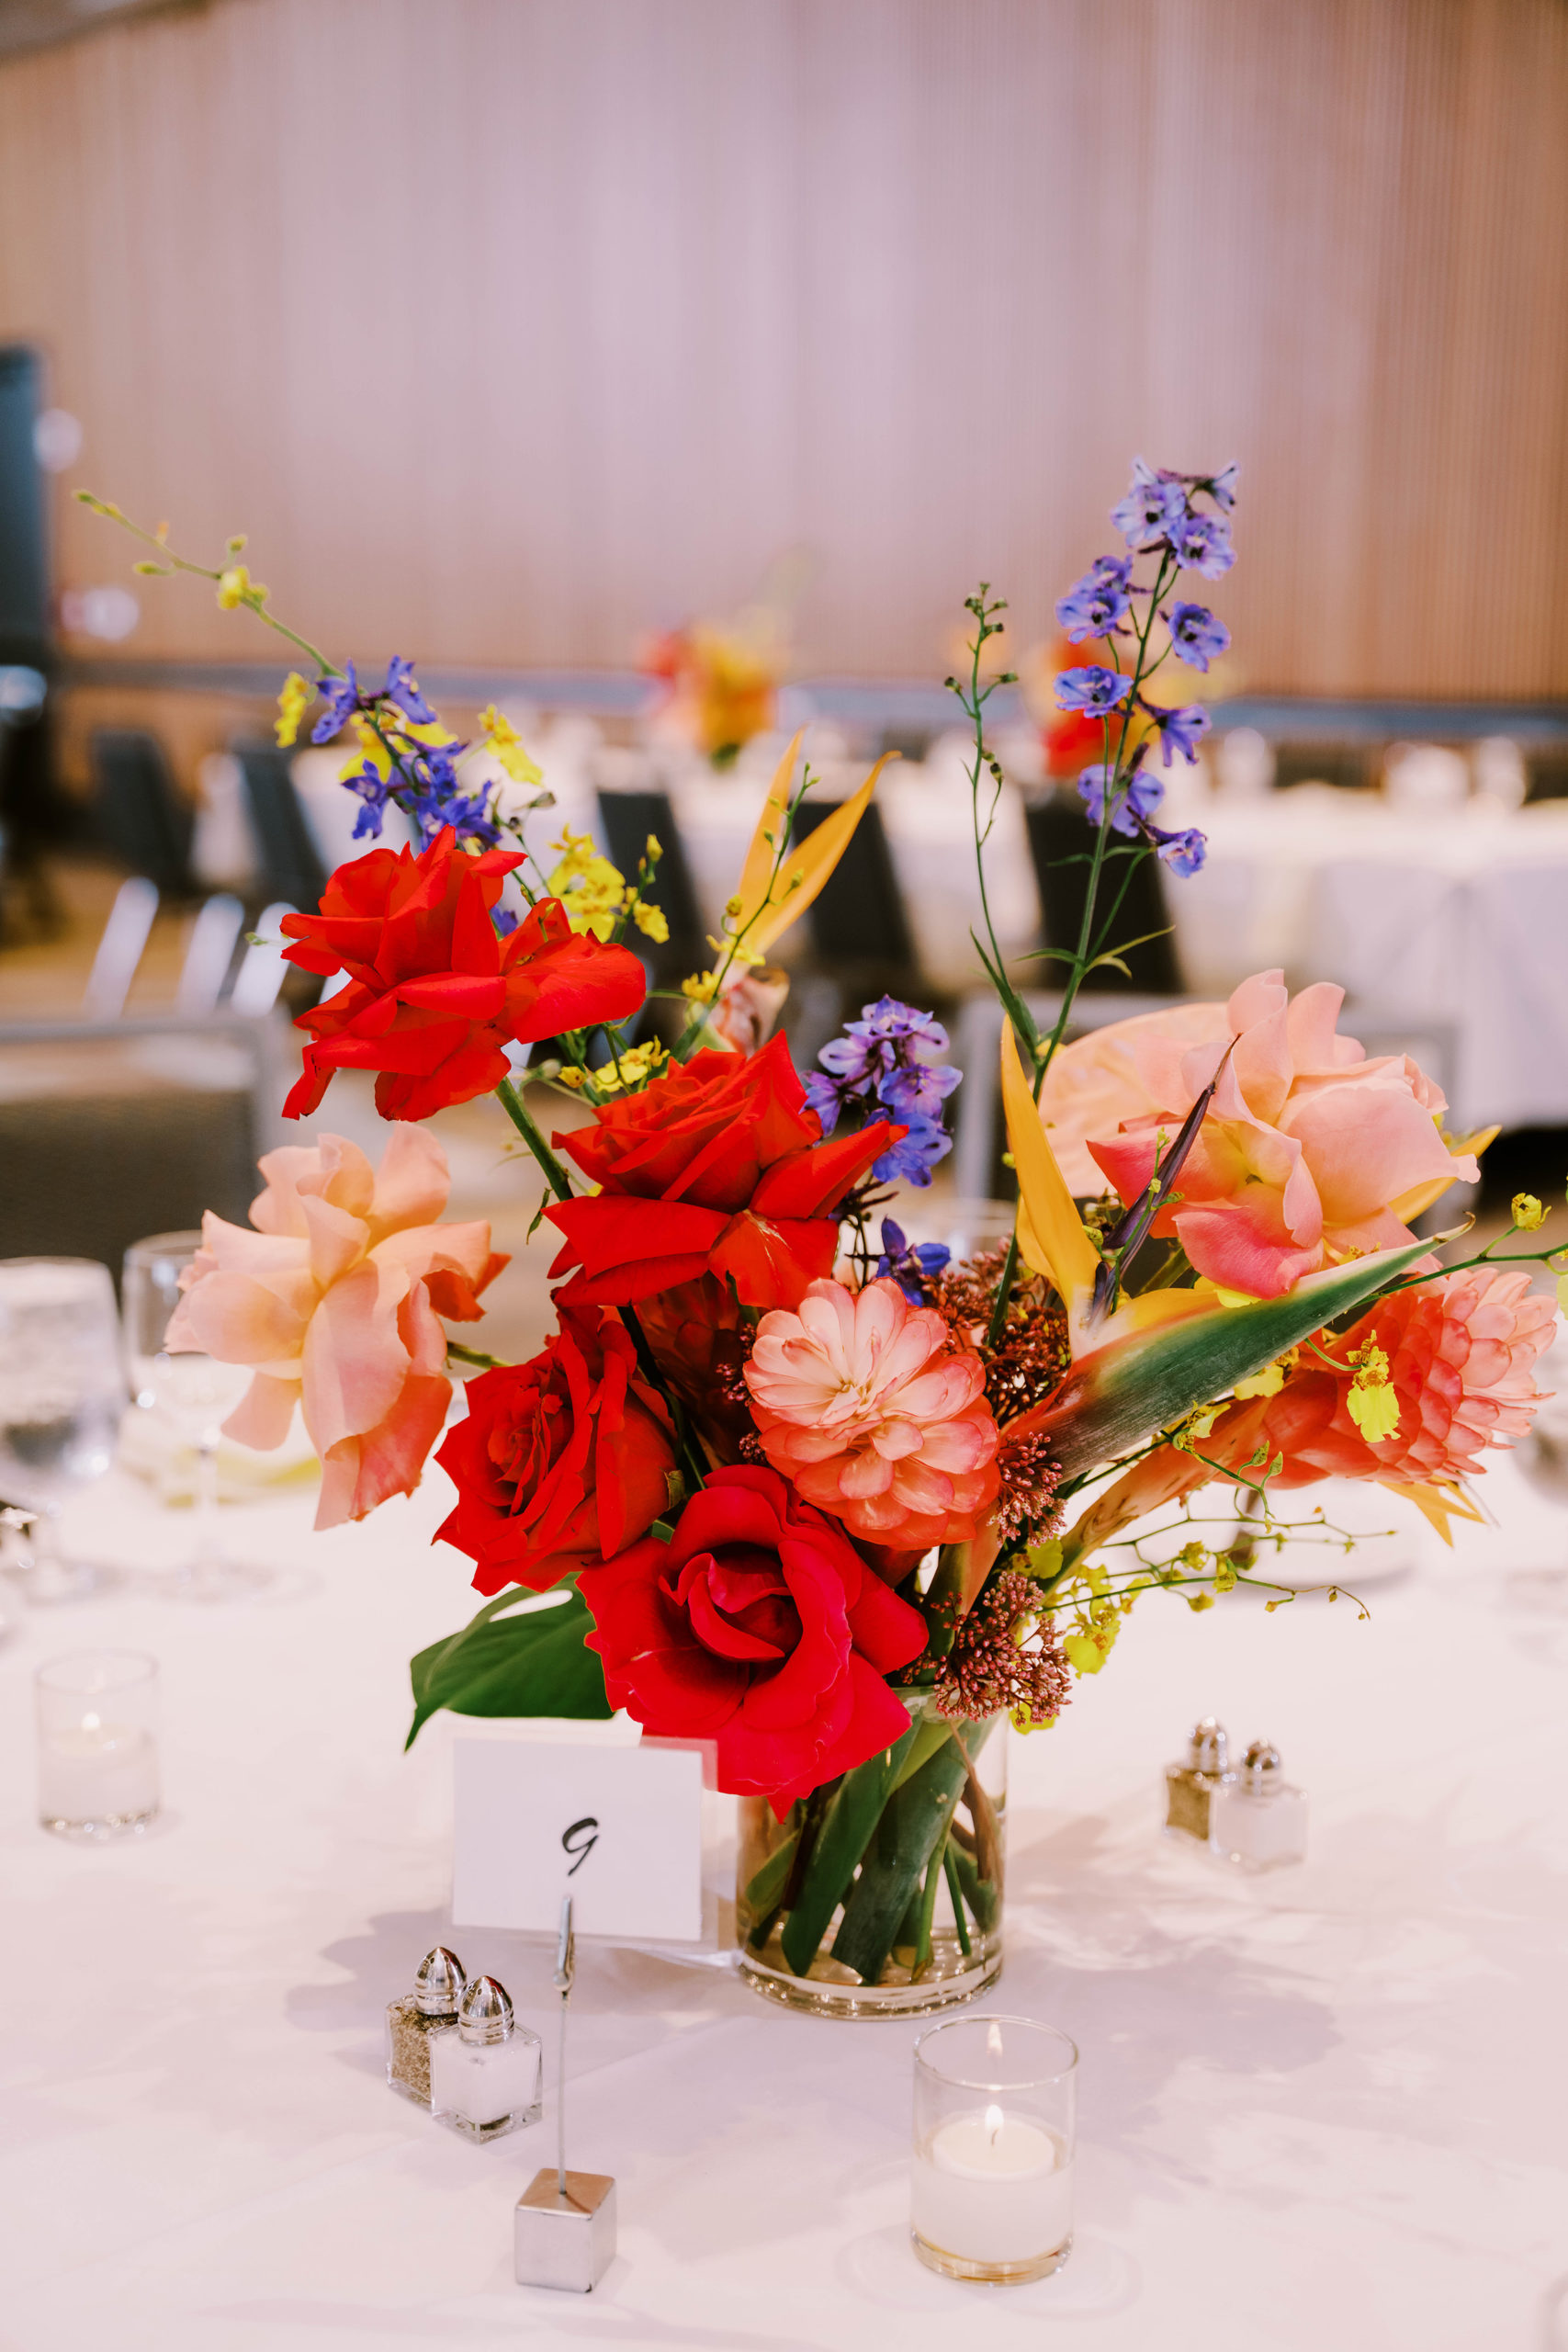 Joey and Dustin's wedding reception at the Bell Harbor Conference Center ballroom, florals by Bahtoh, designed and planned by Emerald Engagements